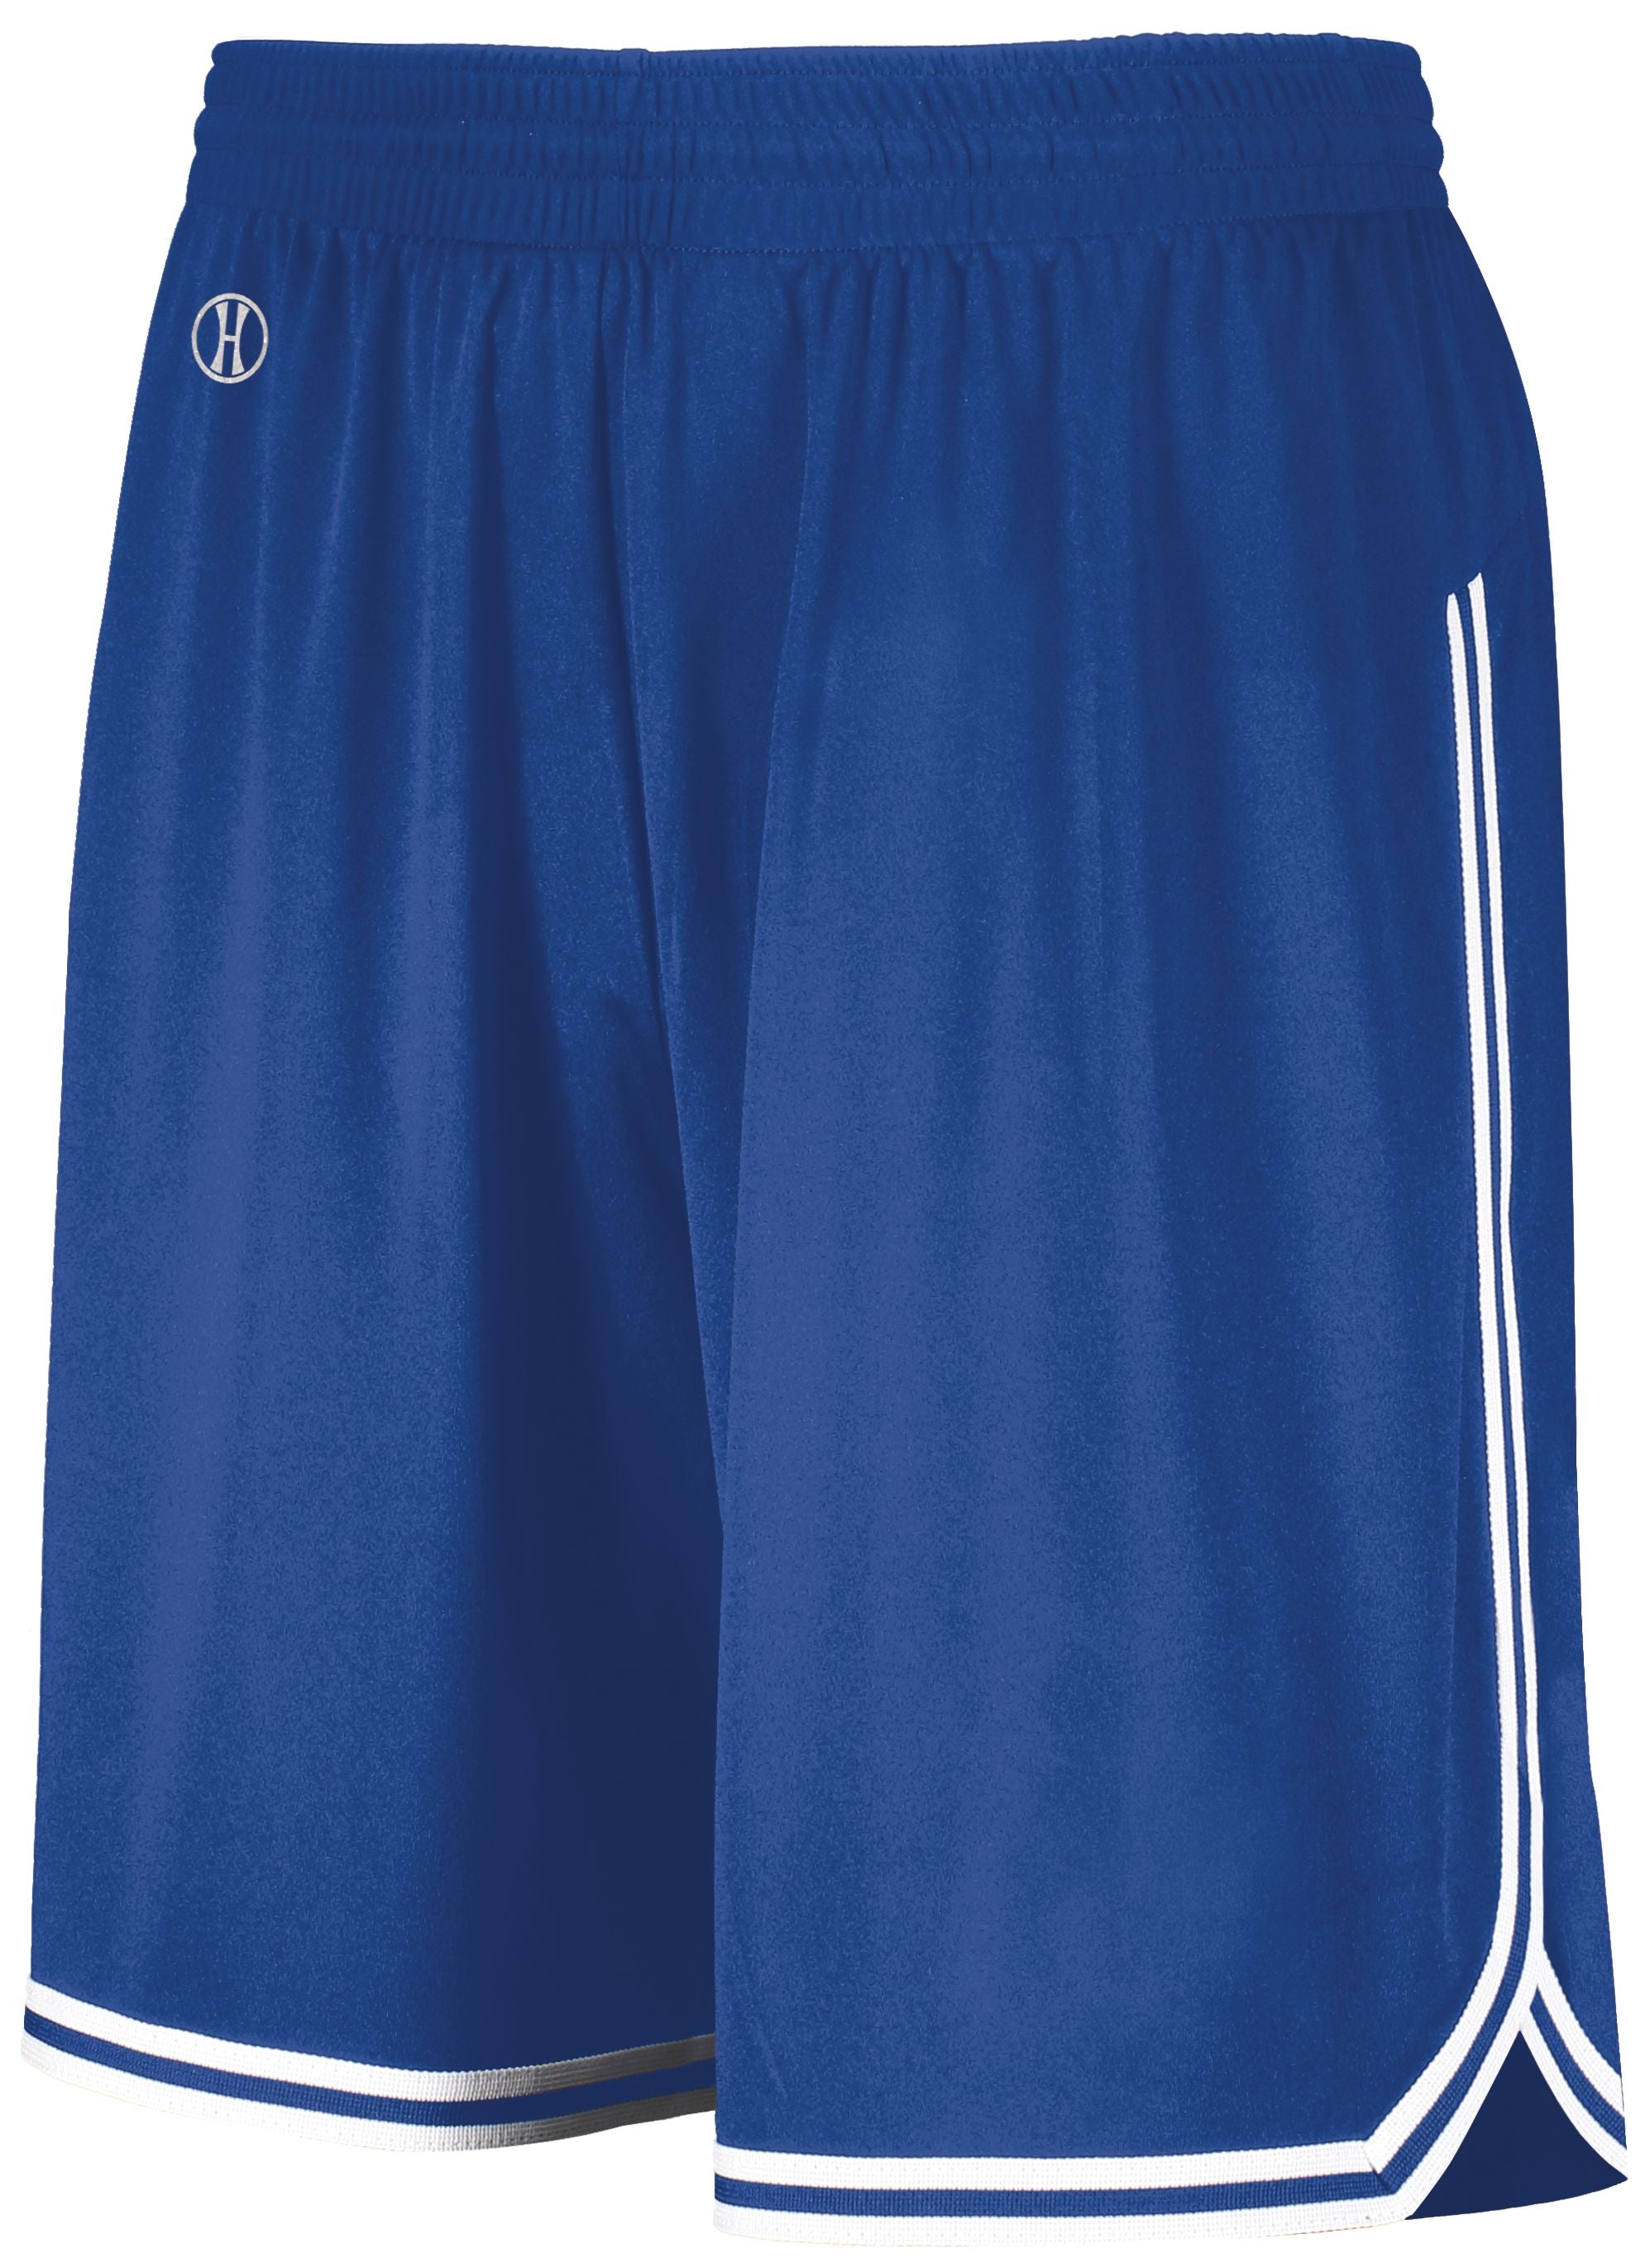 Holloway Retro Basketball Shorts in Royal/White  -Part of the Adult, Adult-Shorts, Basketball, Holloway, All-Sports, All-Sports-1 product lines at KanaleyCreations.com